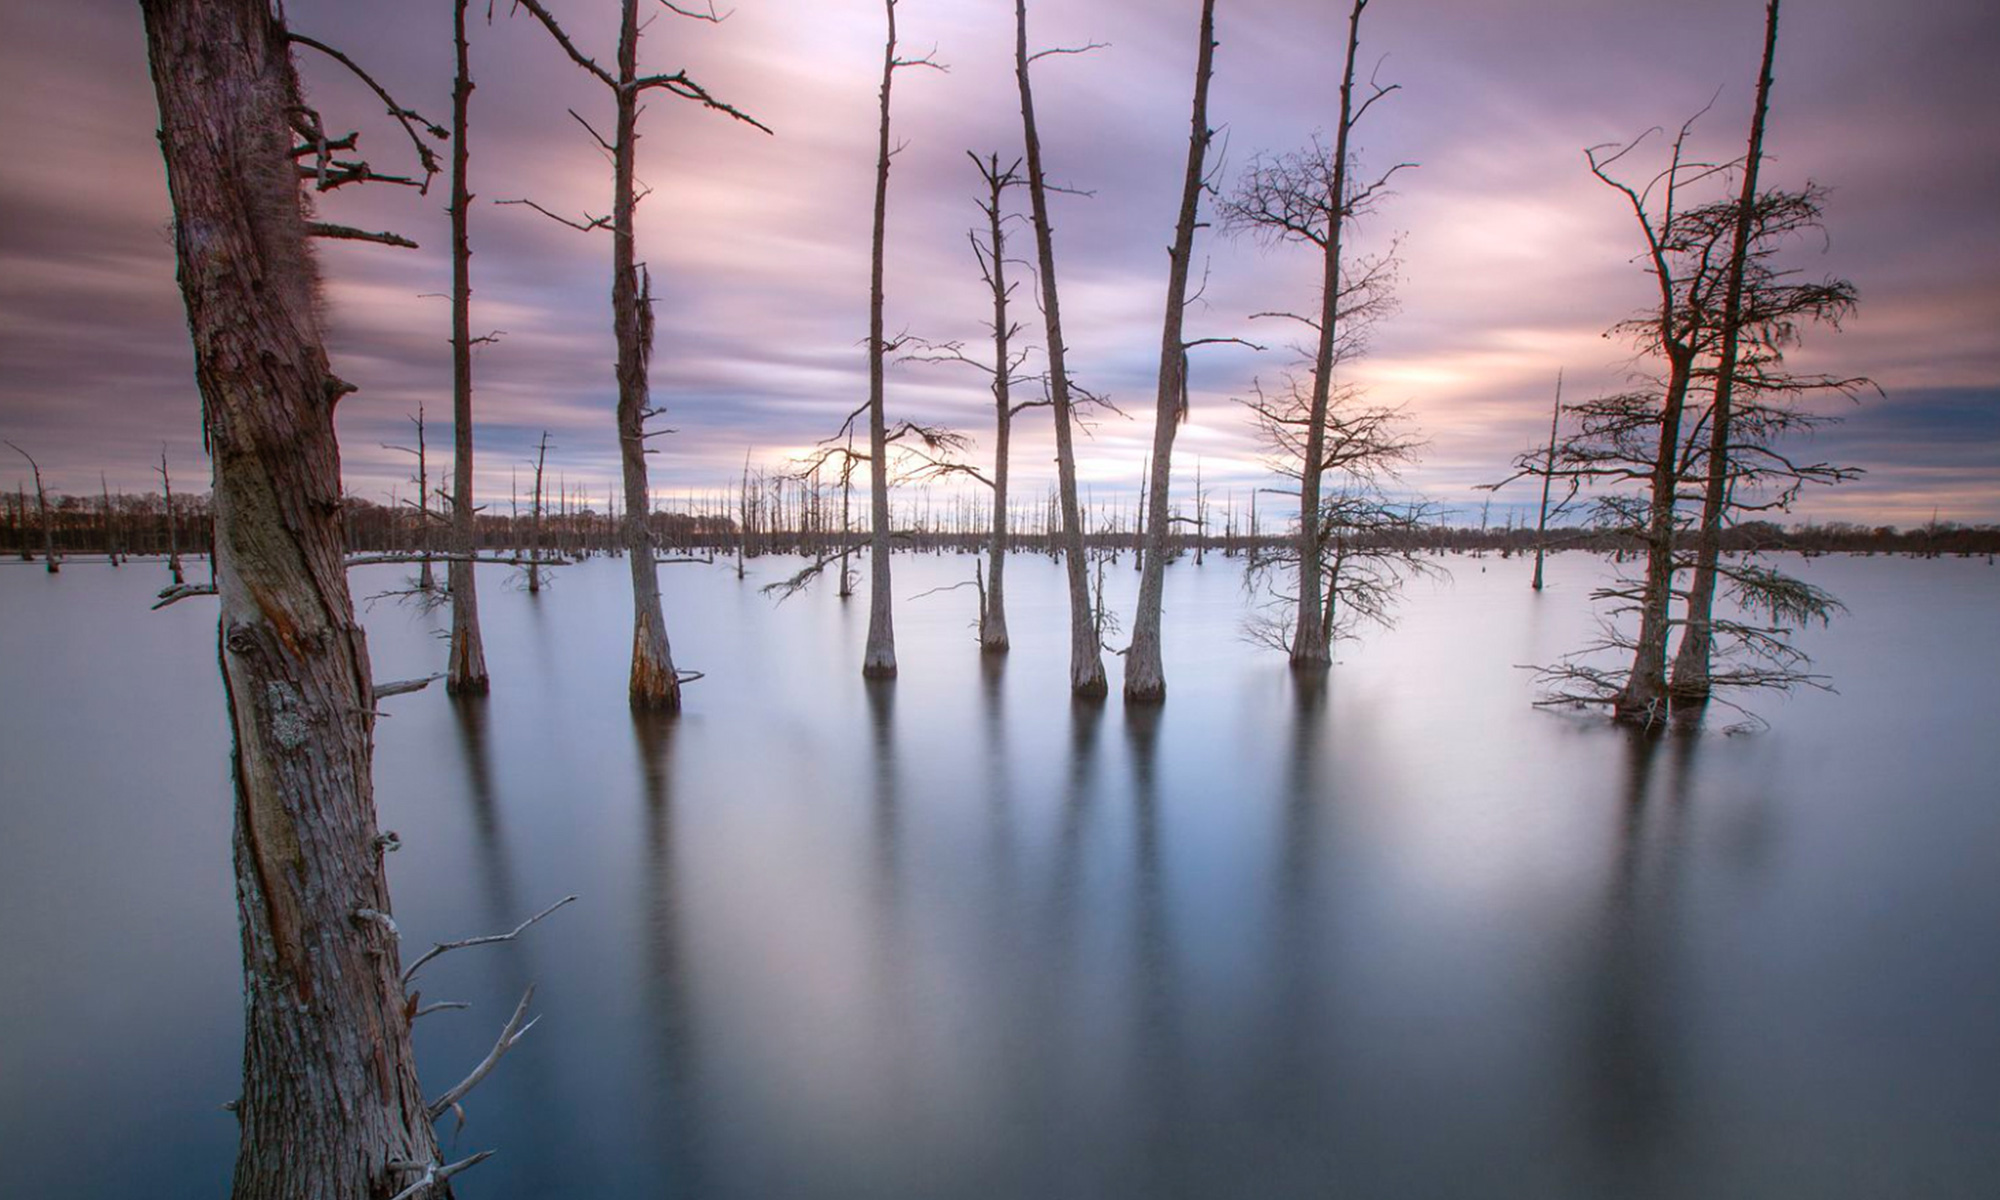 Dead trees in a flooded landscape.